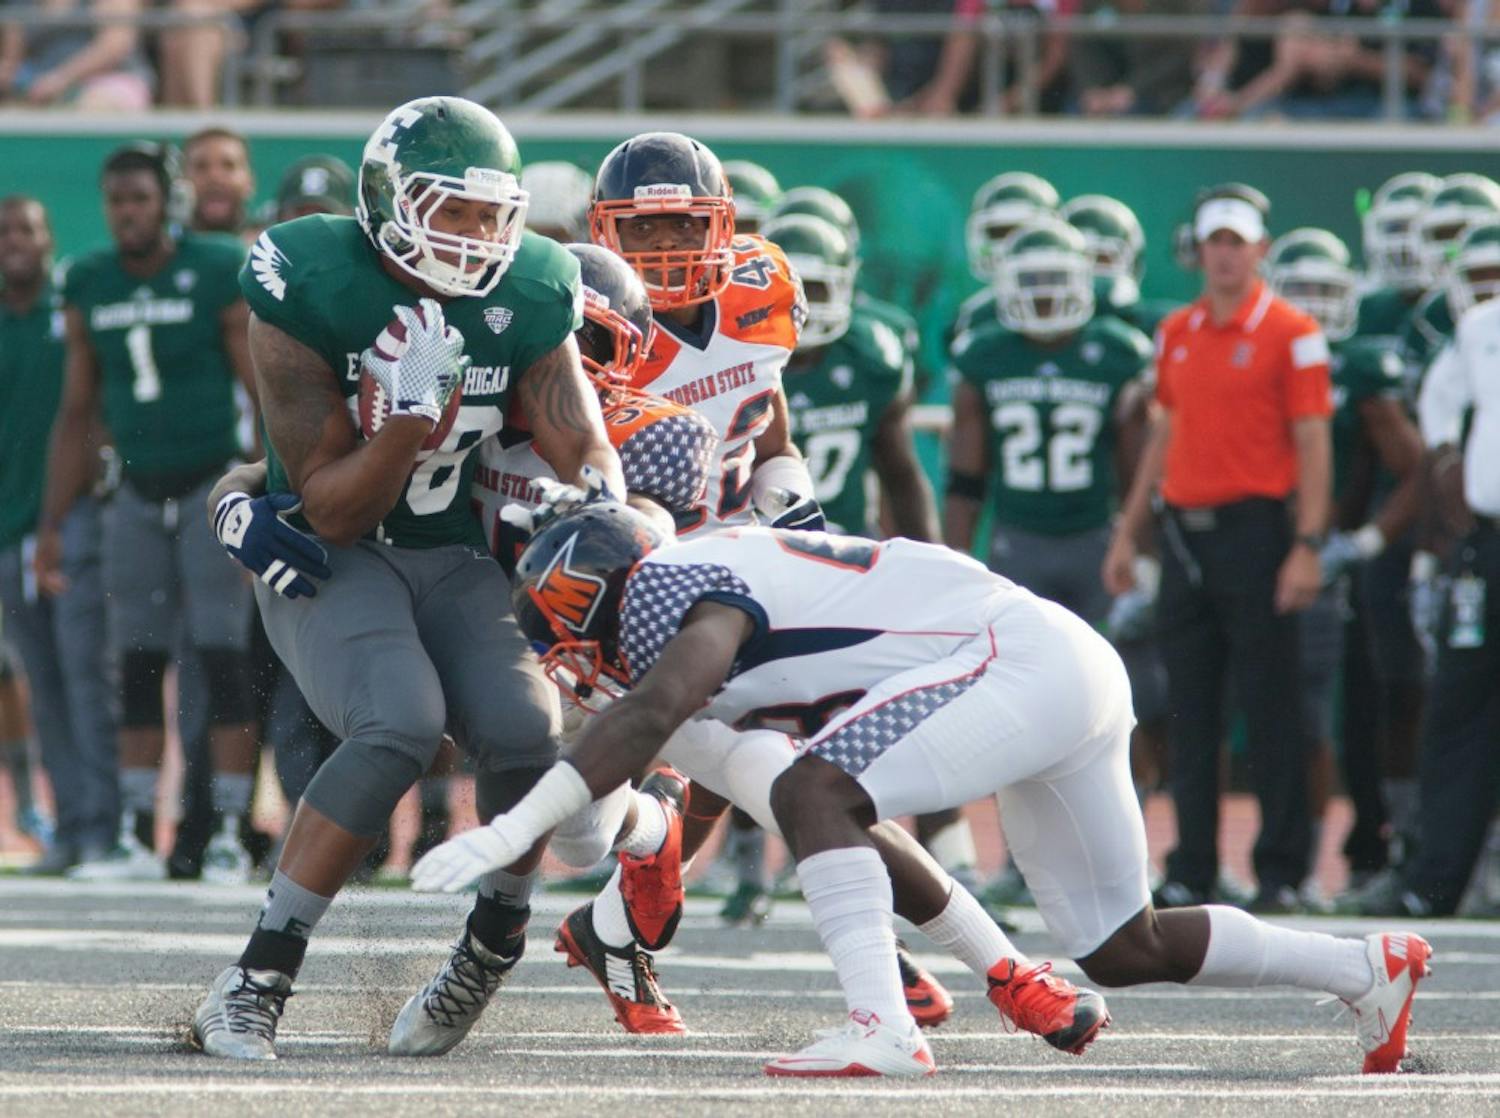 Eastern Michigan tight end Tyreese Russell catches the ball against Morgan State.